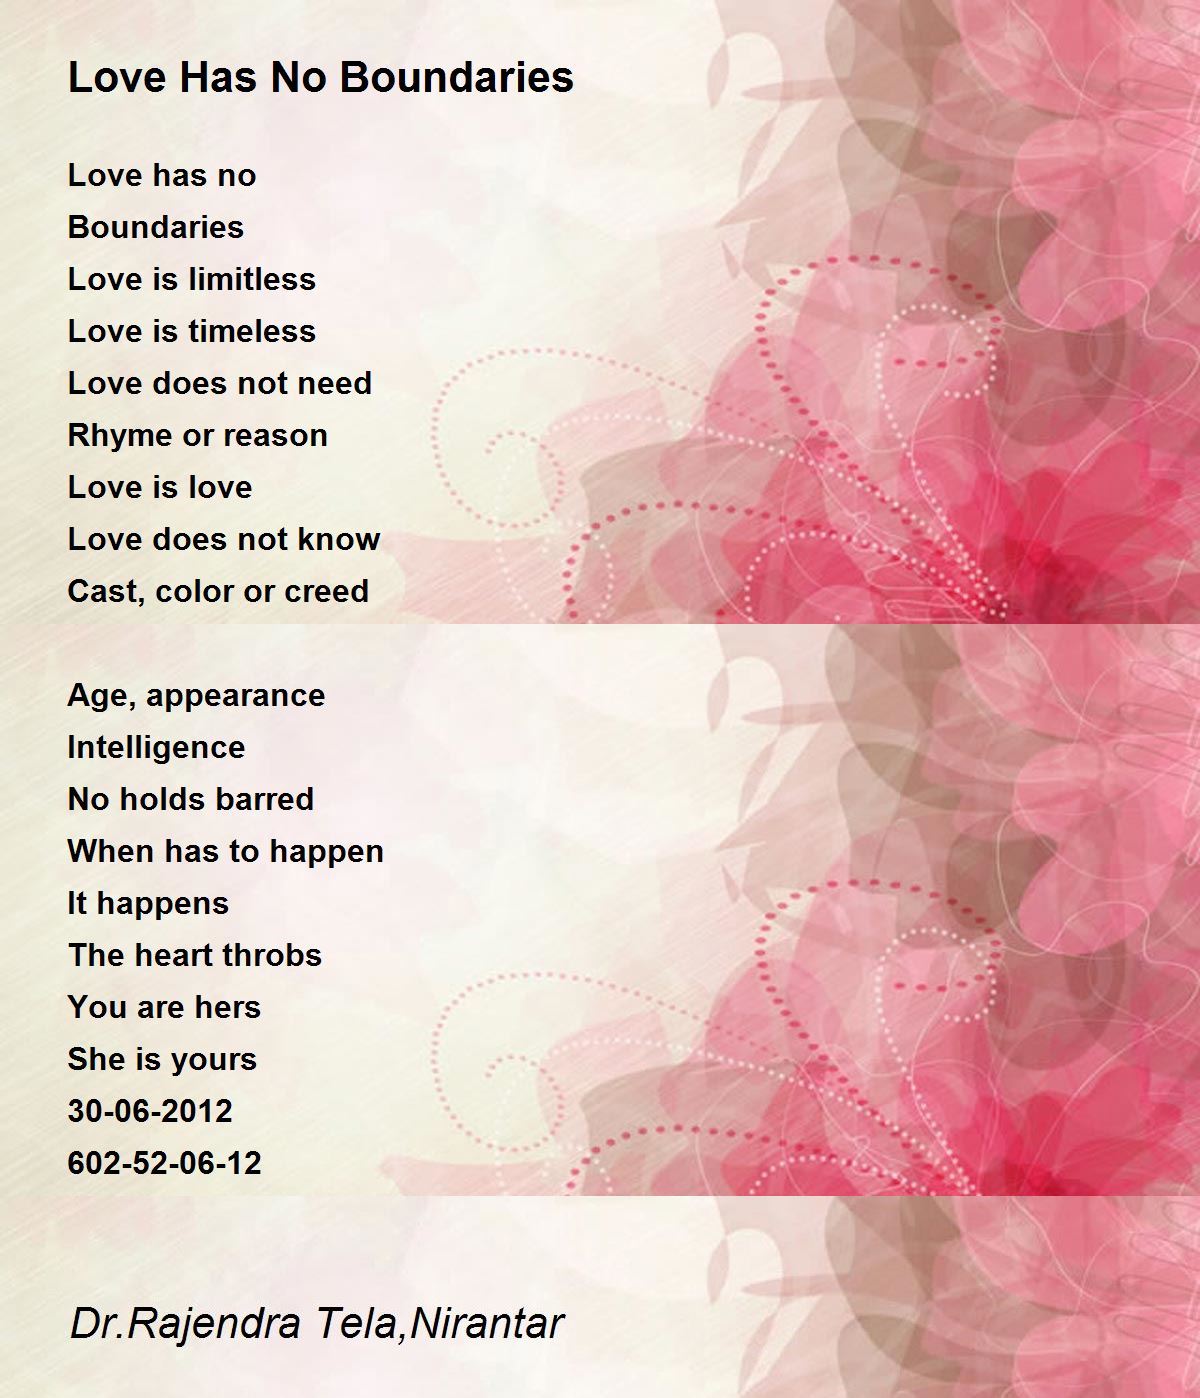 Love Has No Boundaries - Love Has No Boundaries Poem by Dr